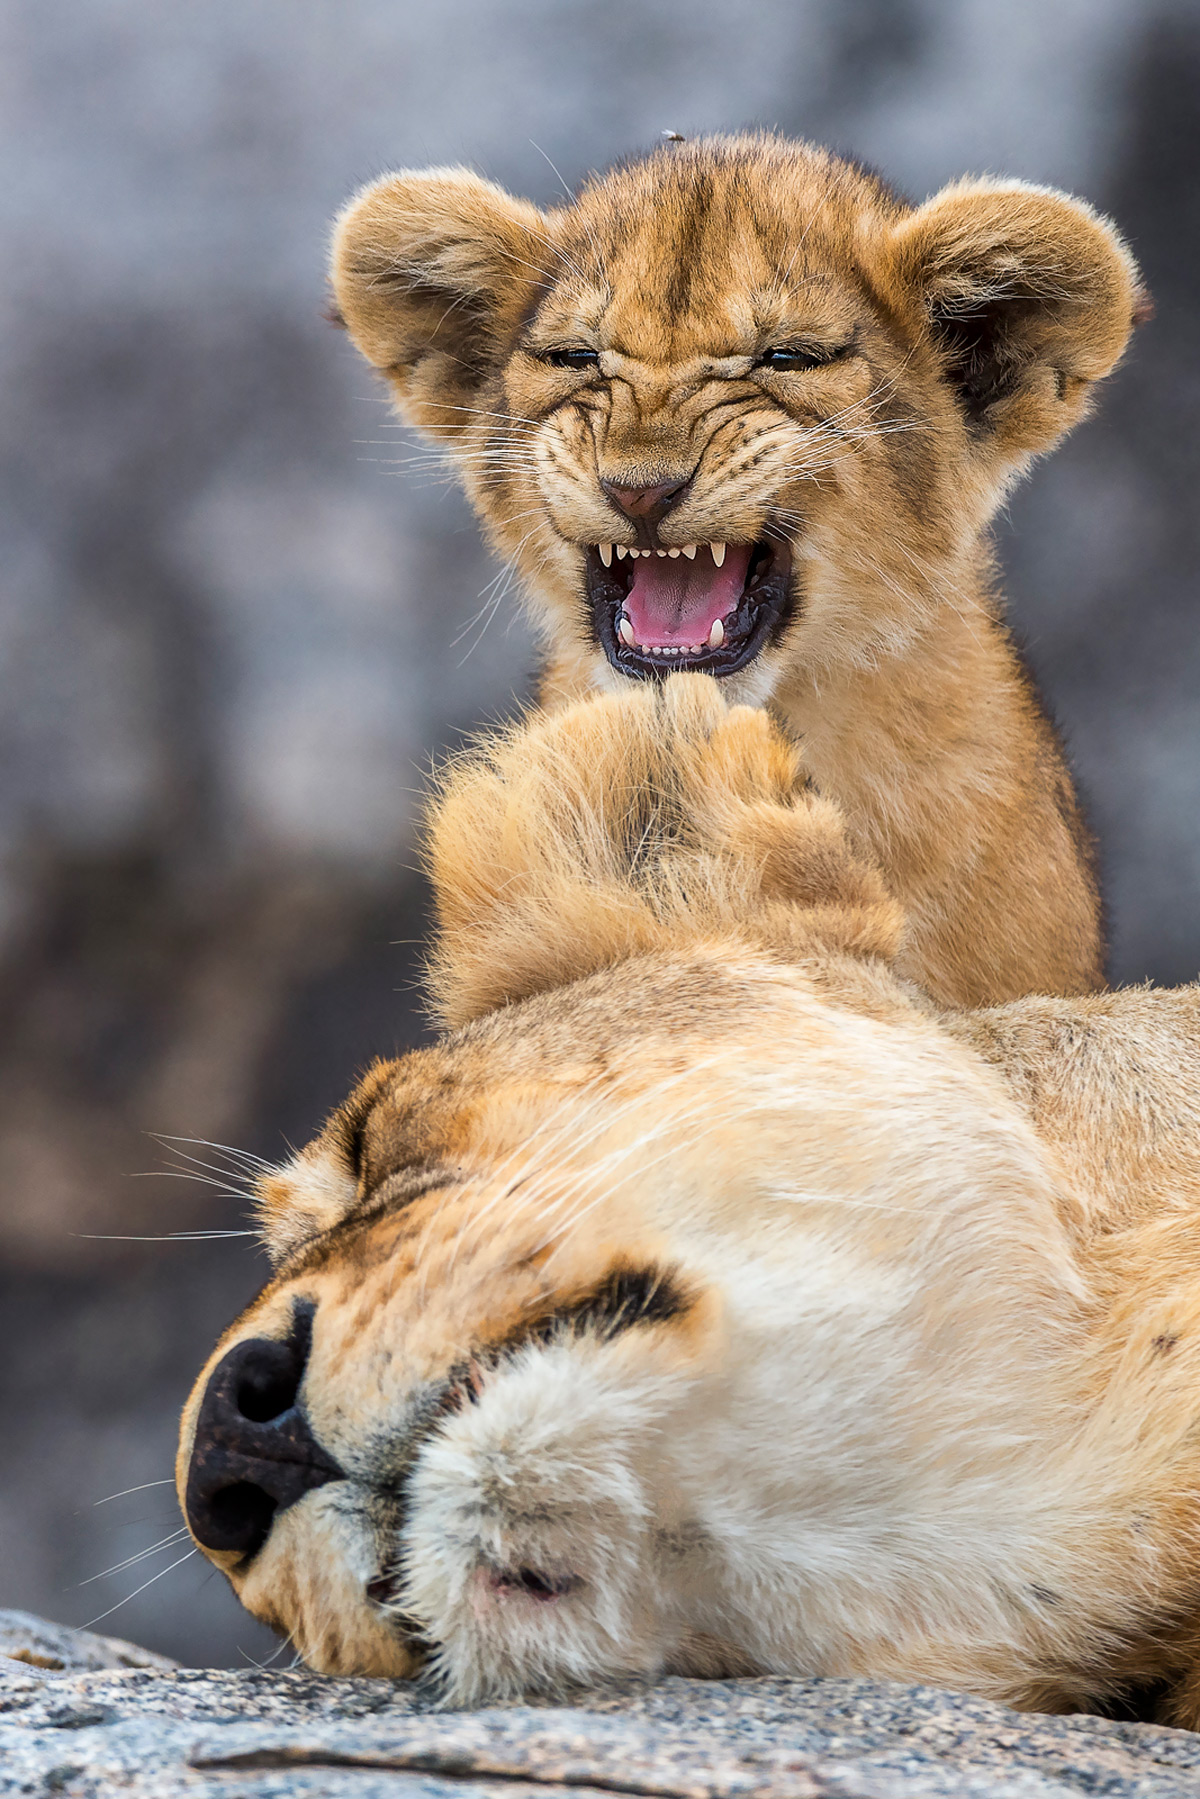 A lion cub tries to gets his mother's attention in Serengeti National Park, Tanzania © Yaron Schmid